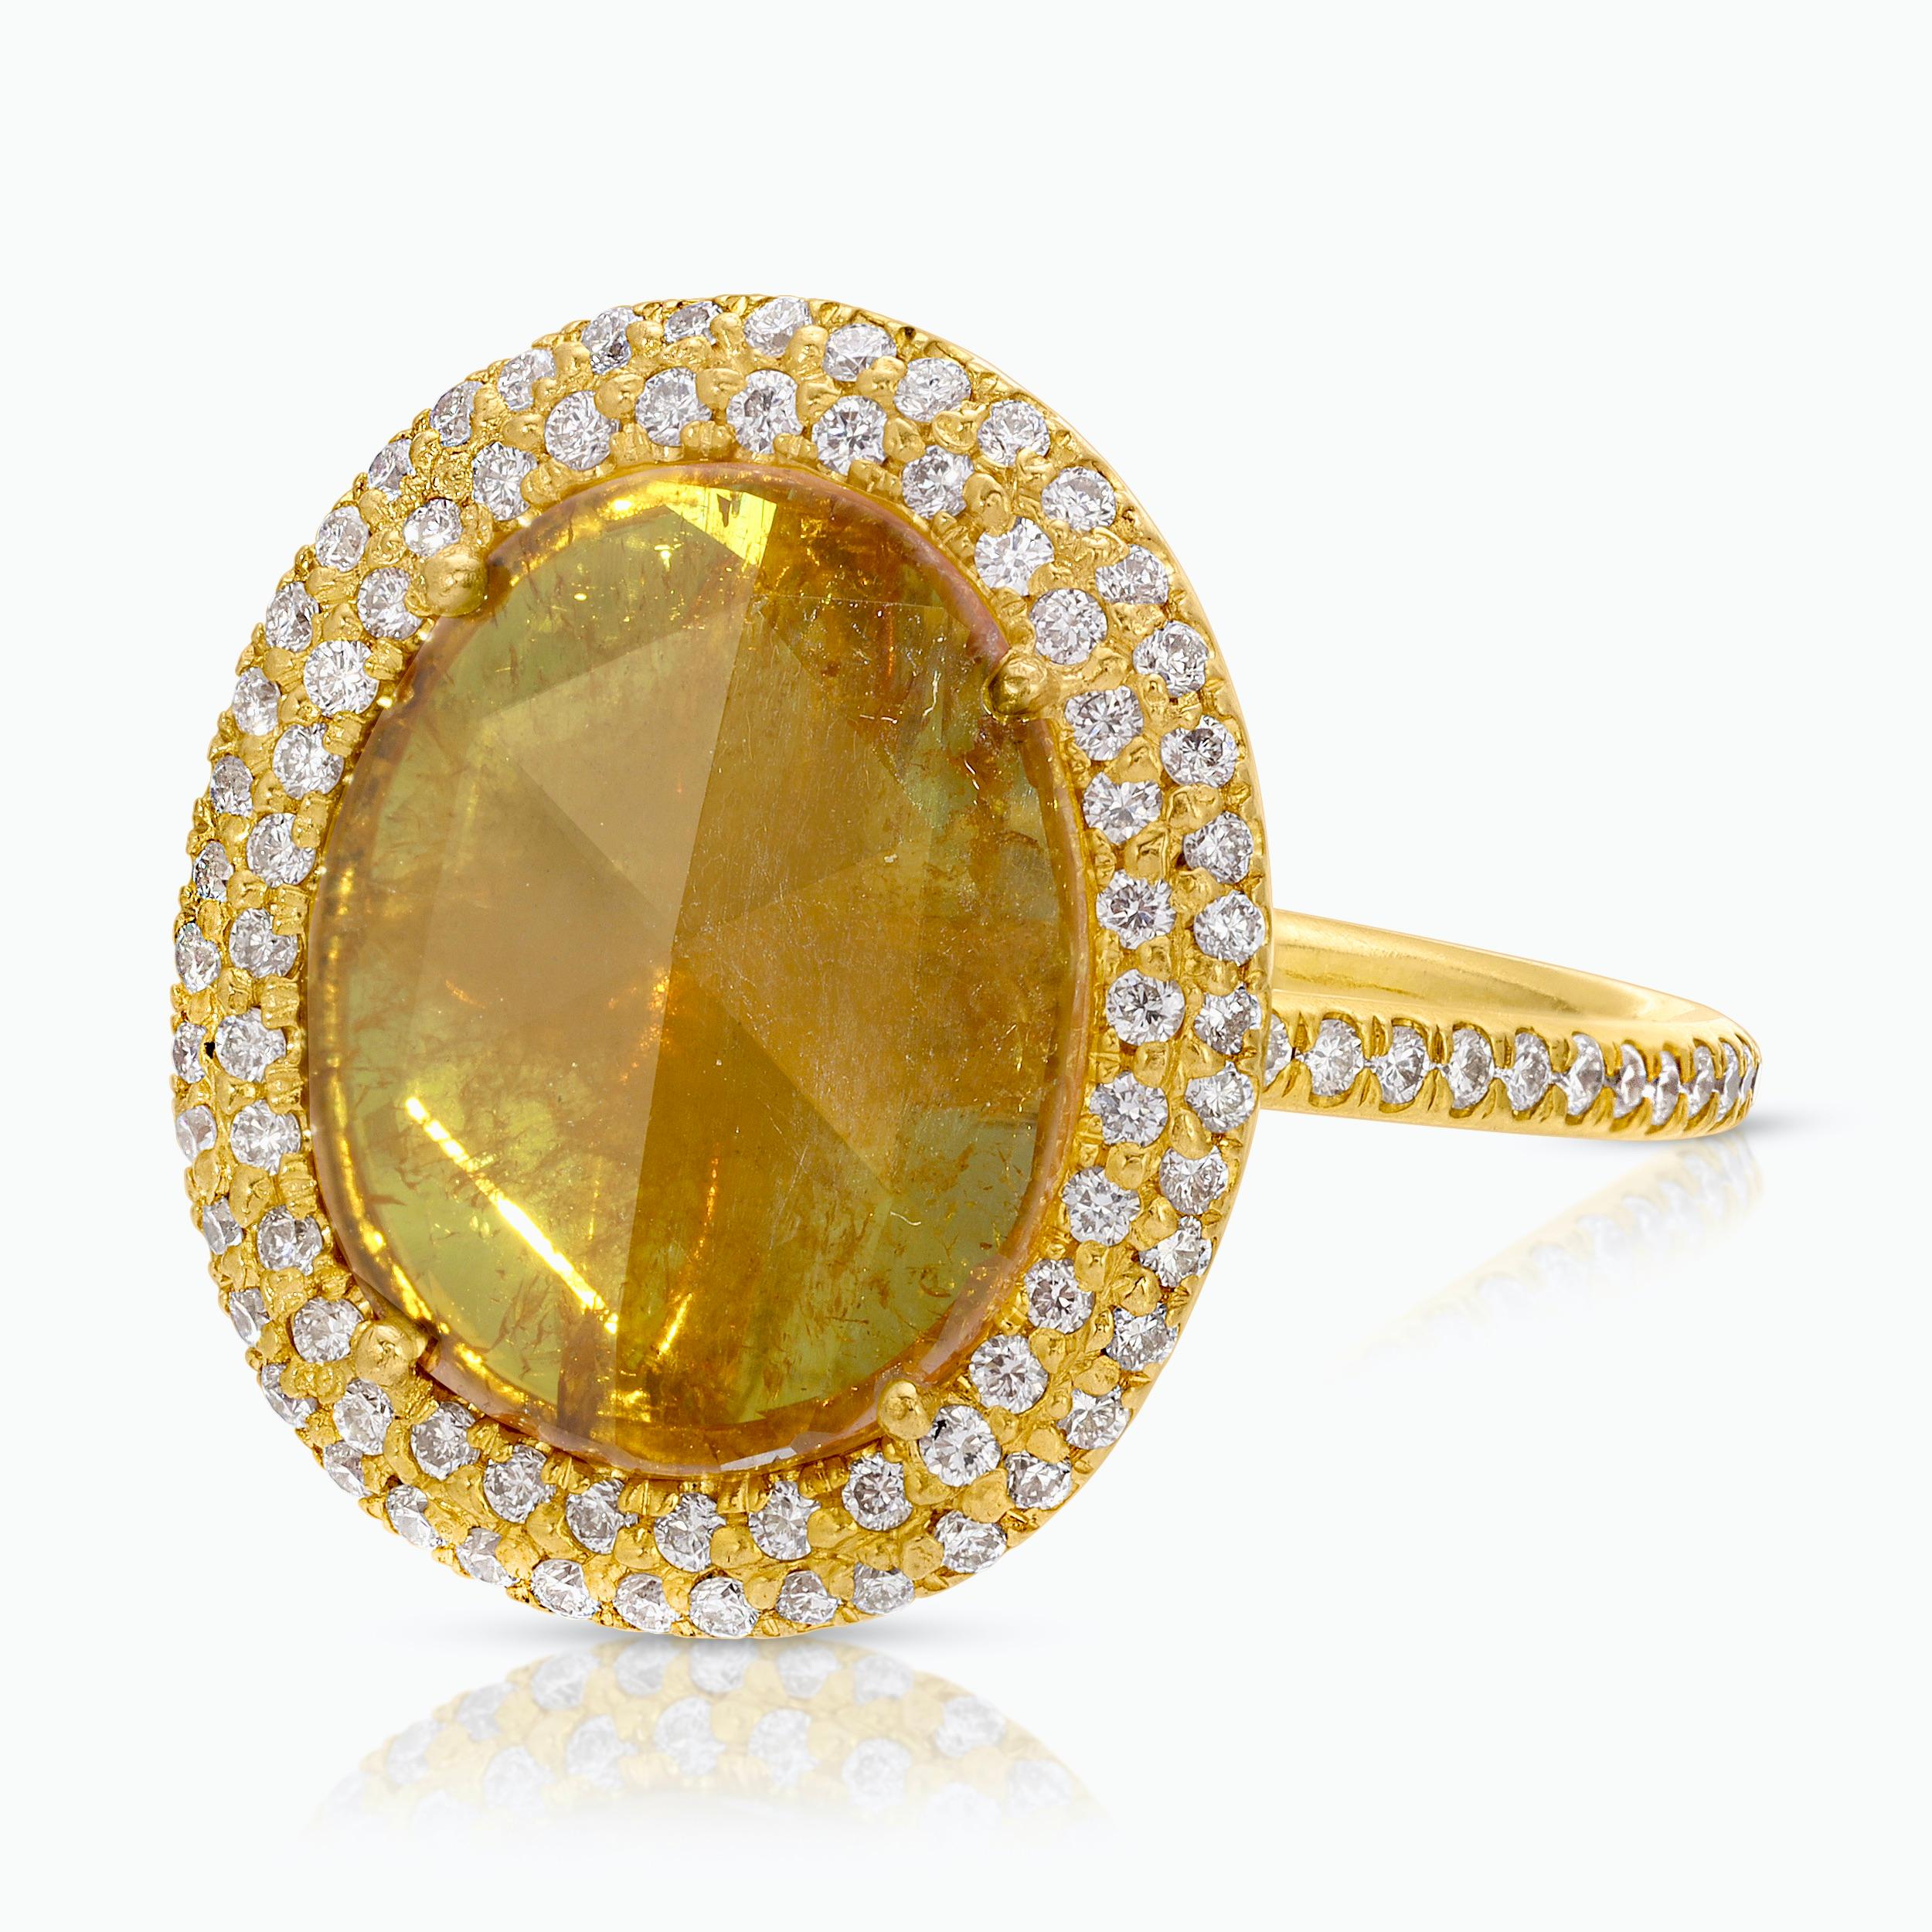 Intense Yellow Diamond Slice Ring with Diamond Pave Halo in 18k Yellow Gold In New Condition For Sale In Santa Monica, CA